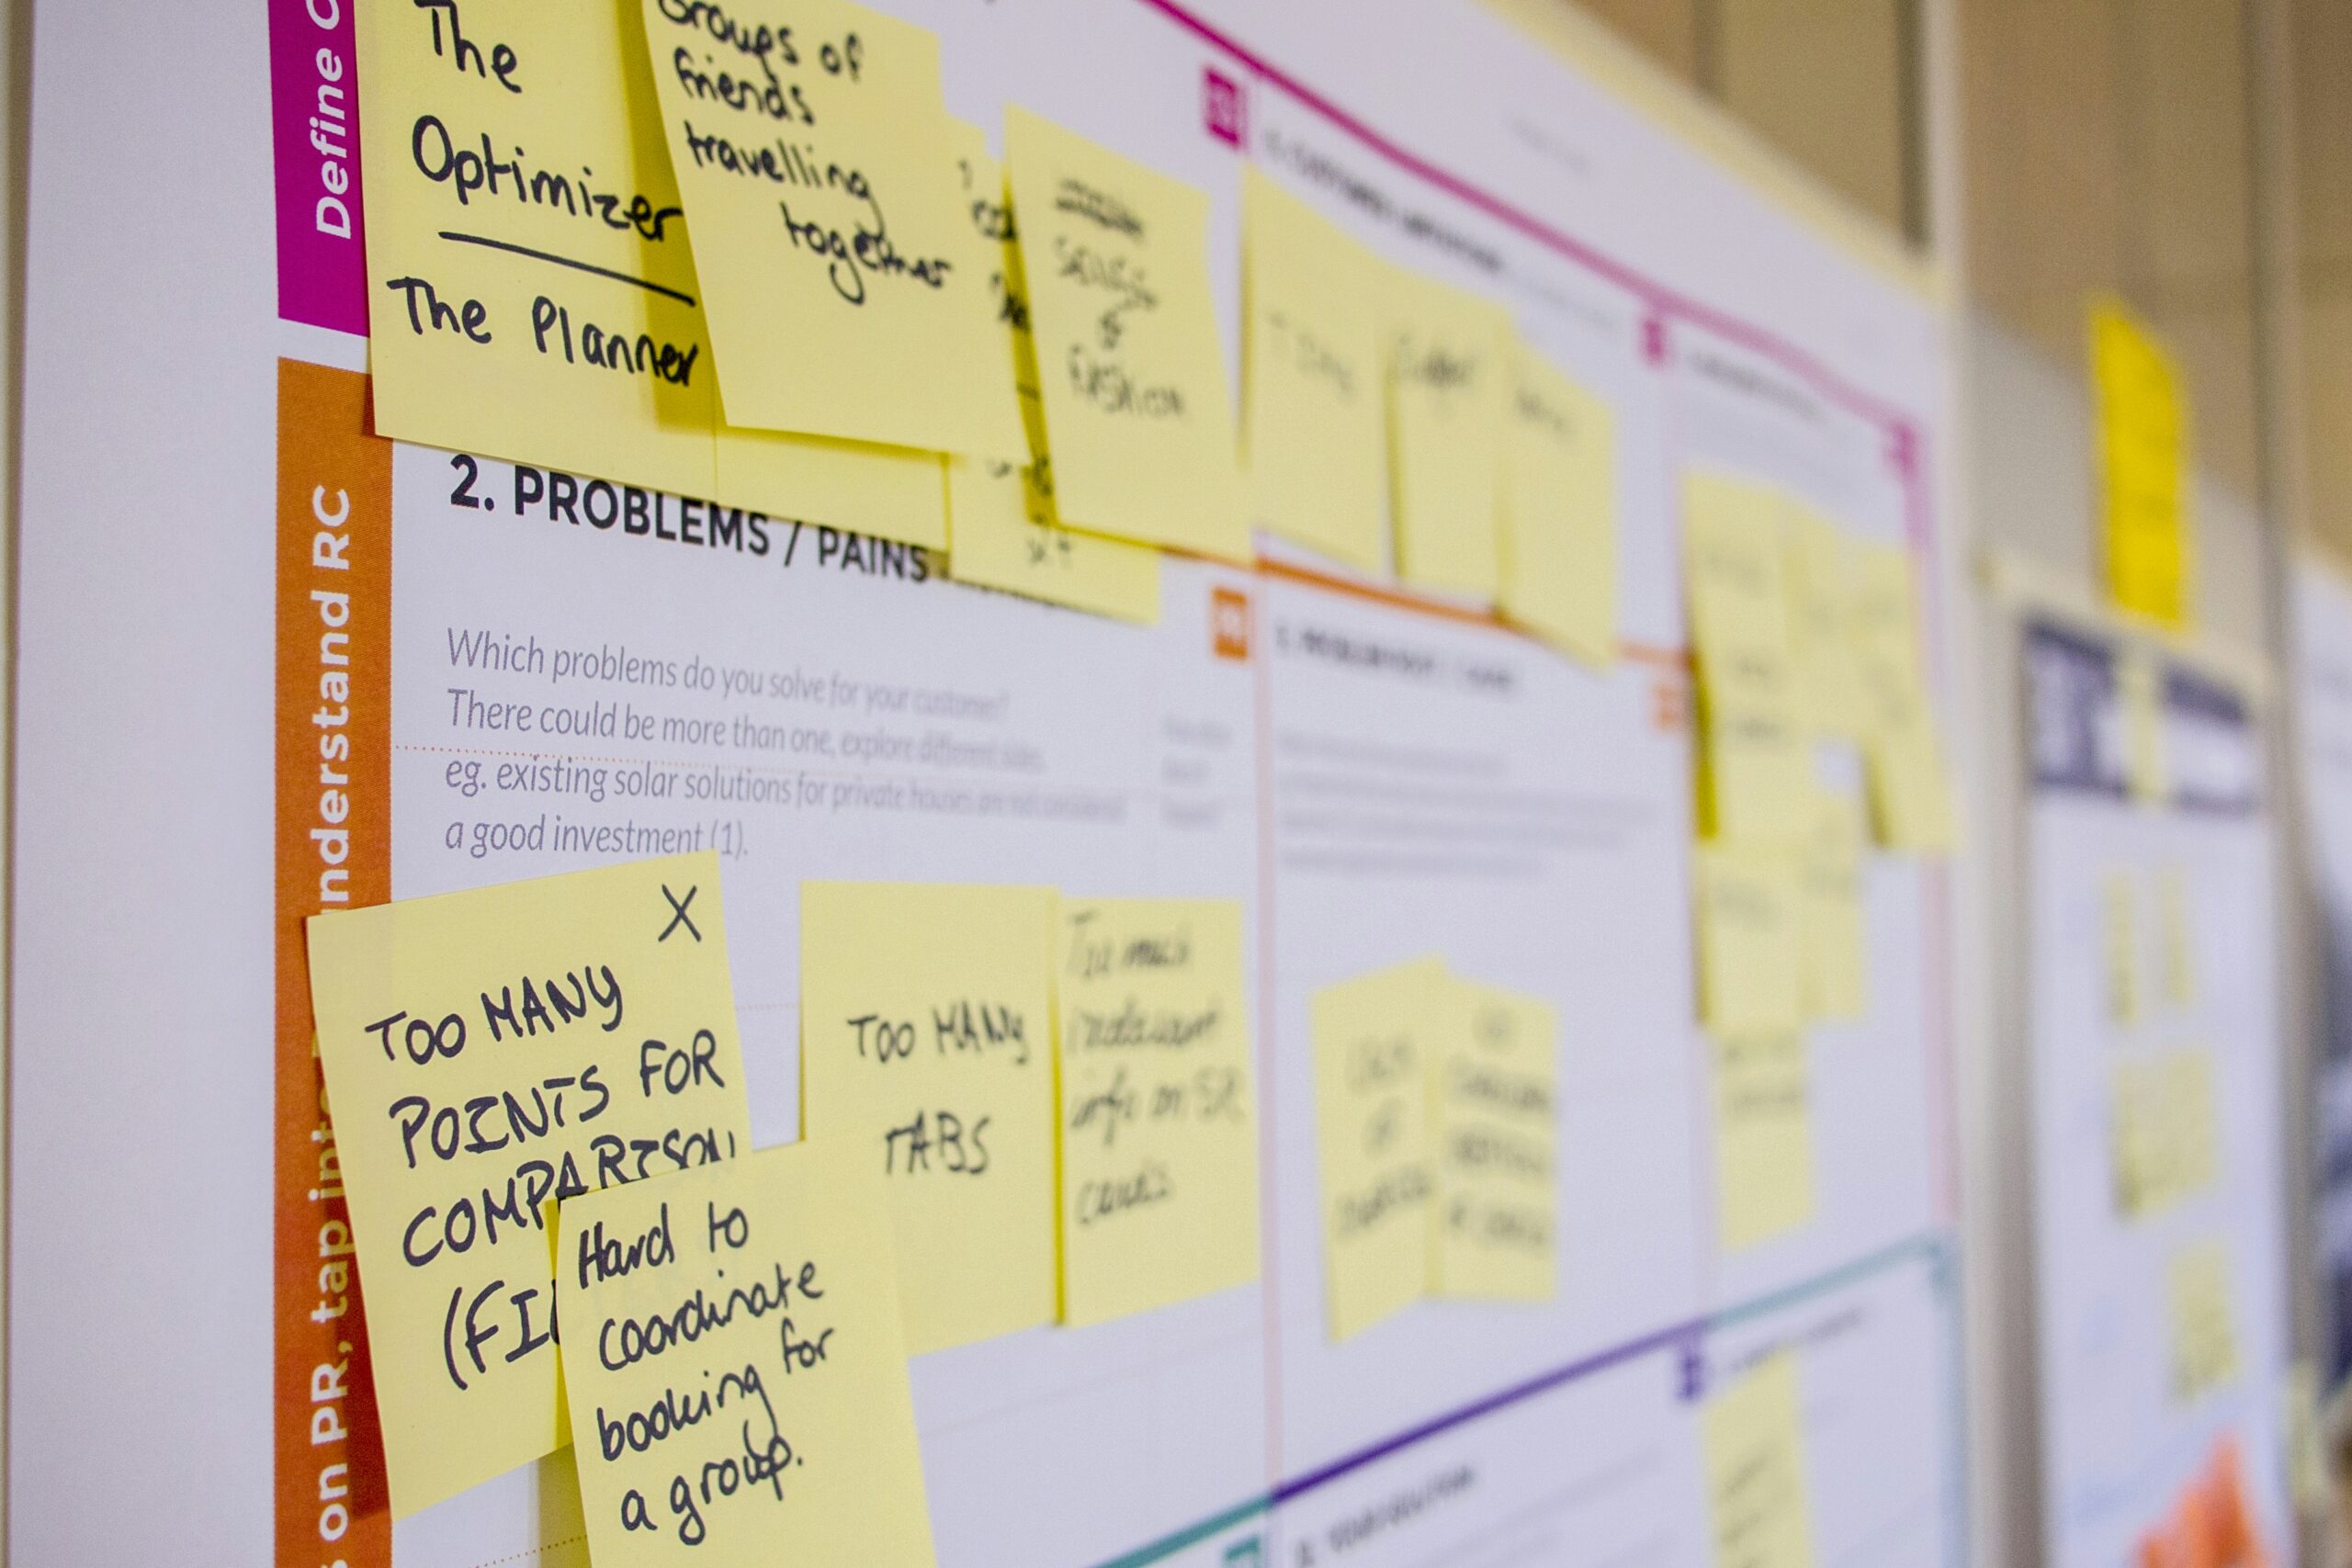 5 Ways a Scrum Master Can Remove Hindrances for the Team